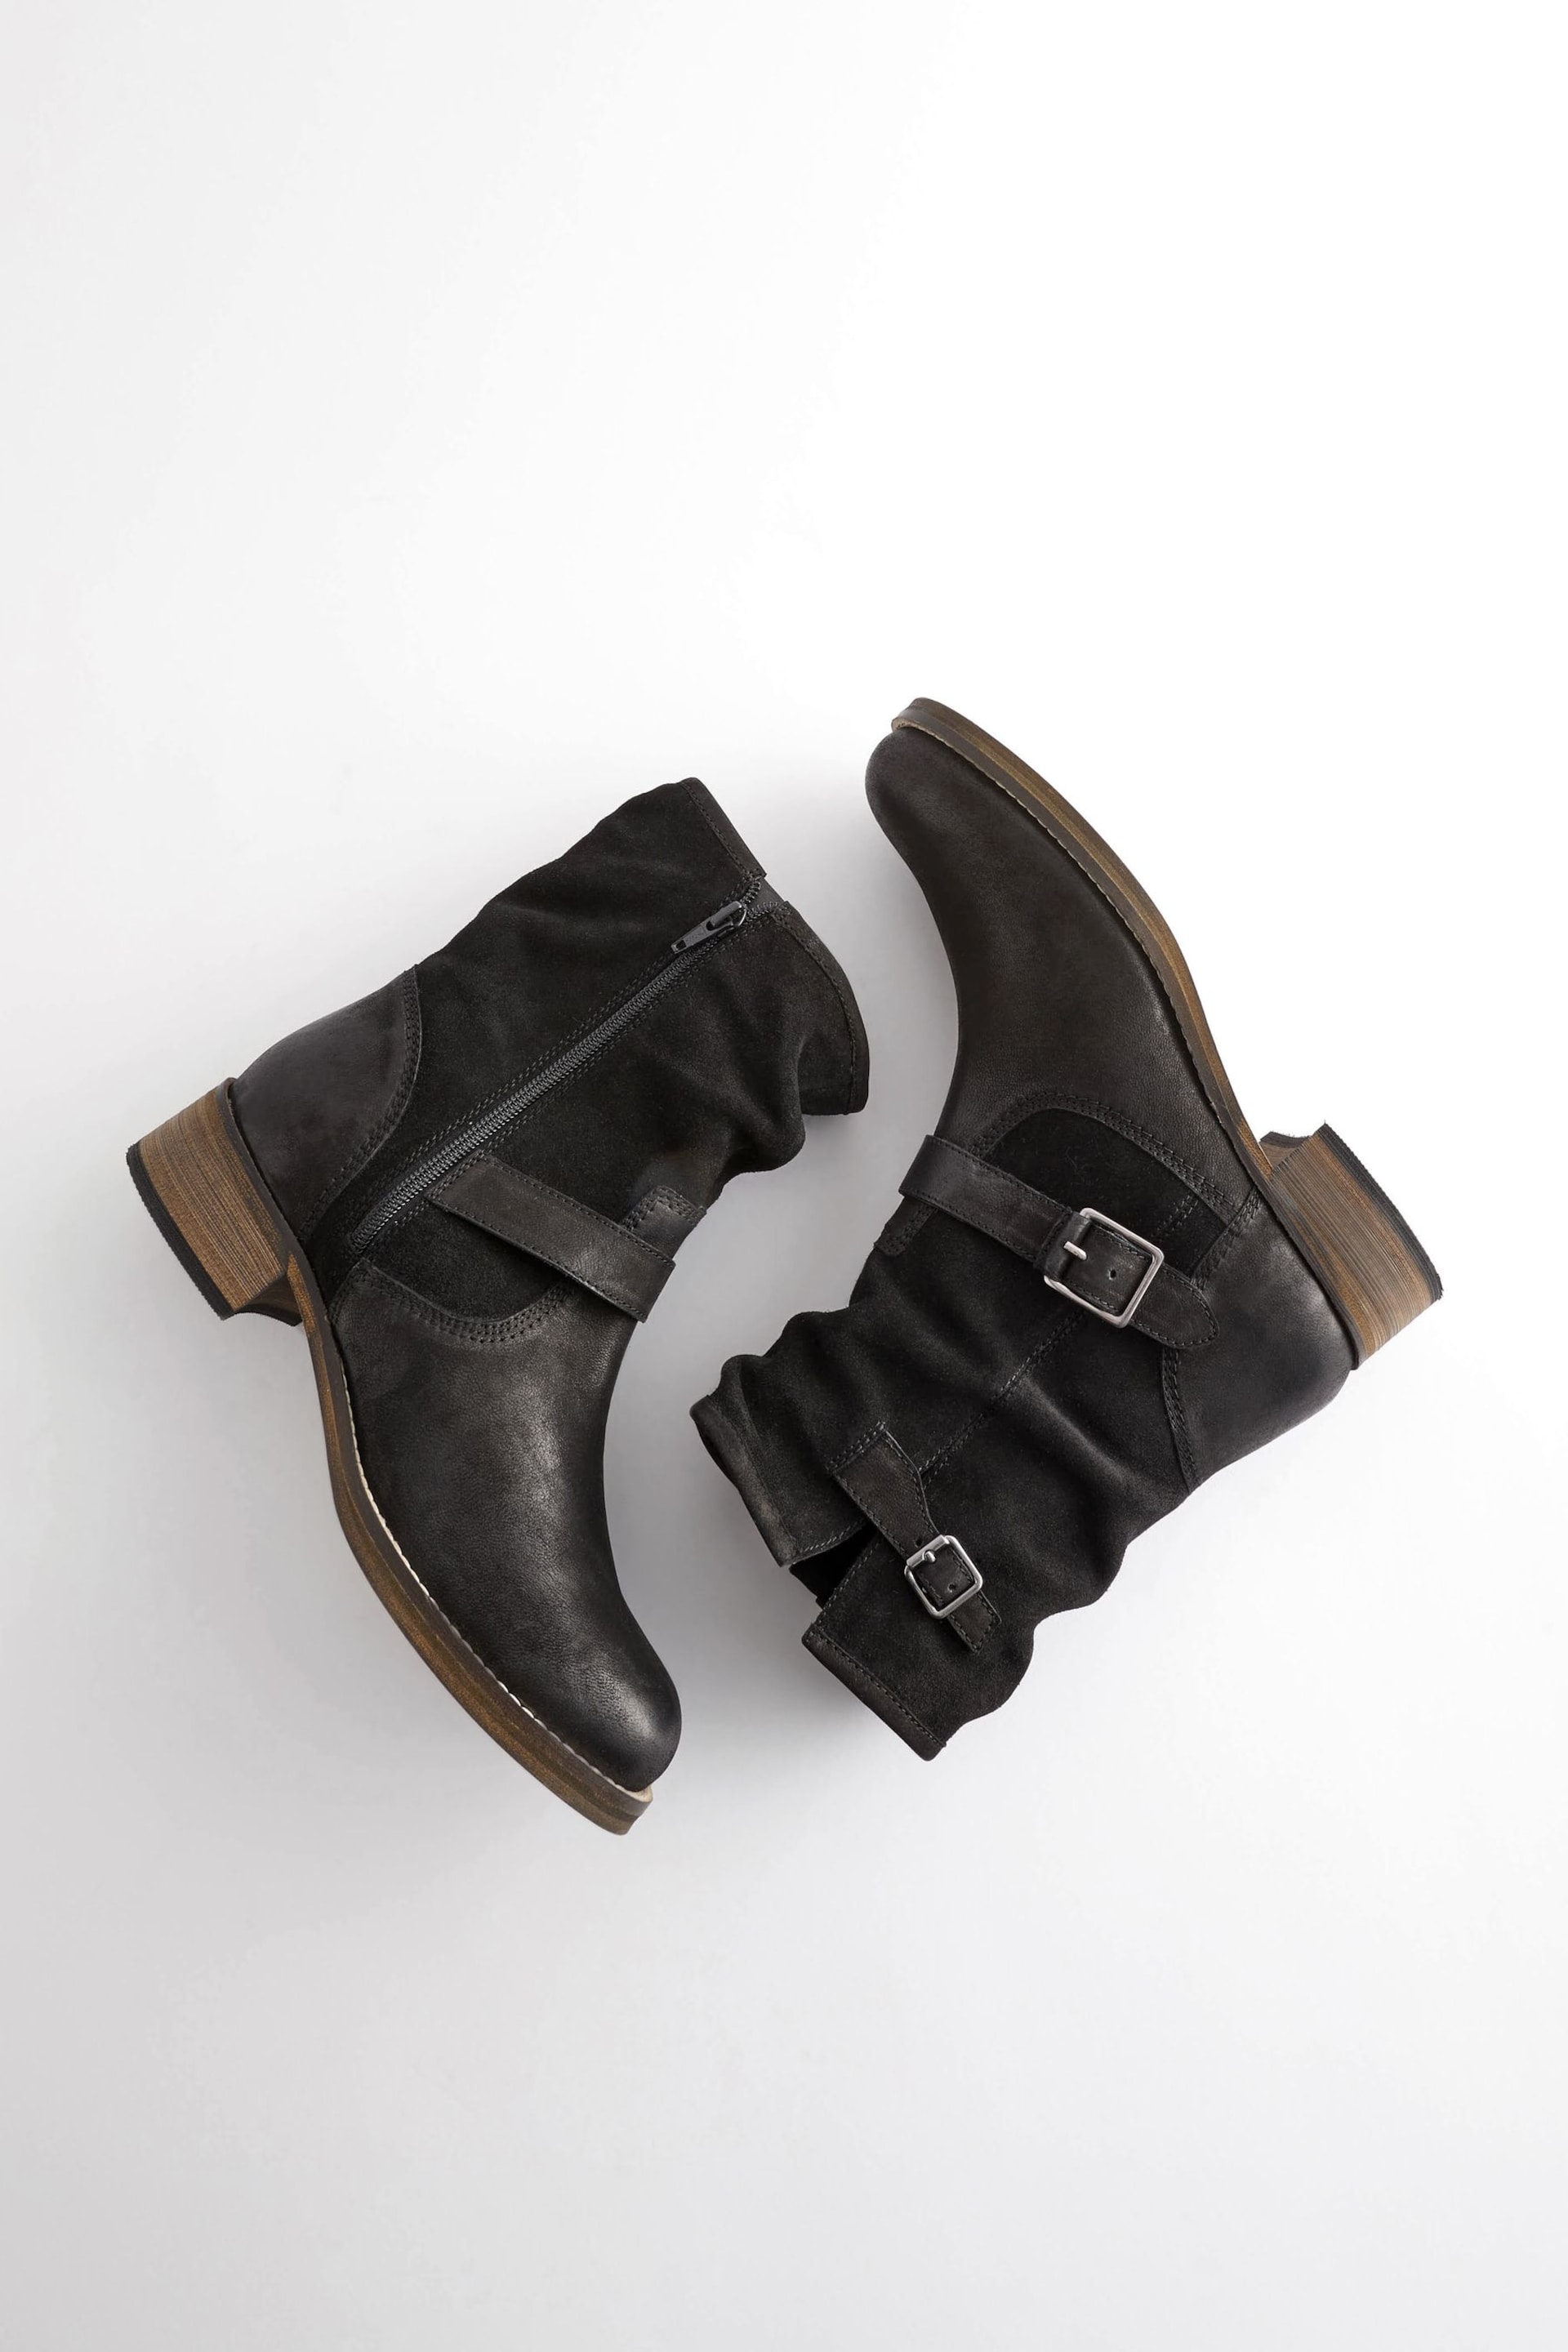 Black Regular/Wide Fit Forever Comfort® Leather Slouch Ankle Boots - Image 4 of 7